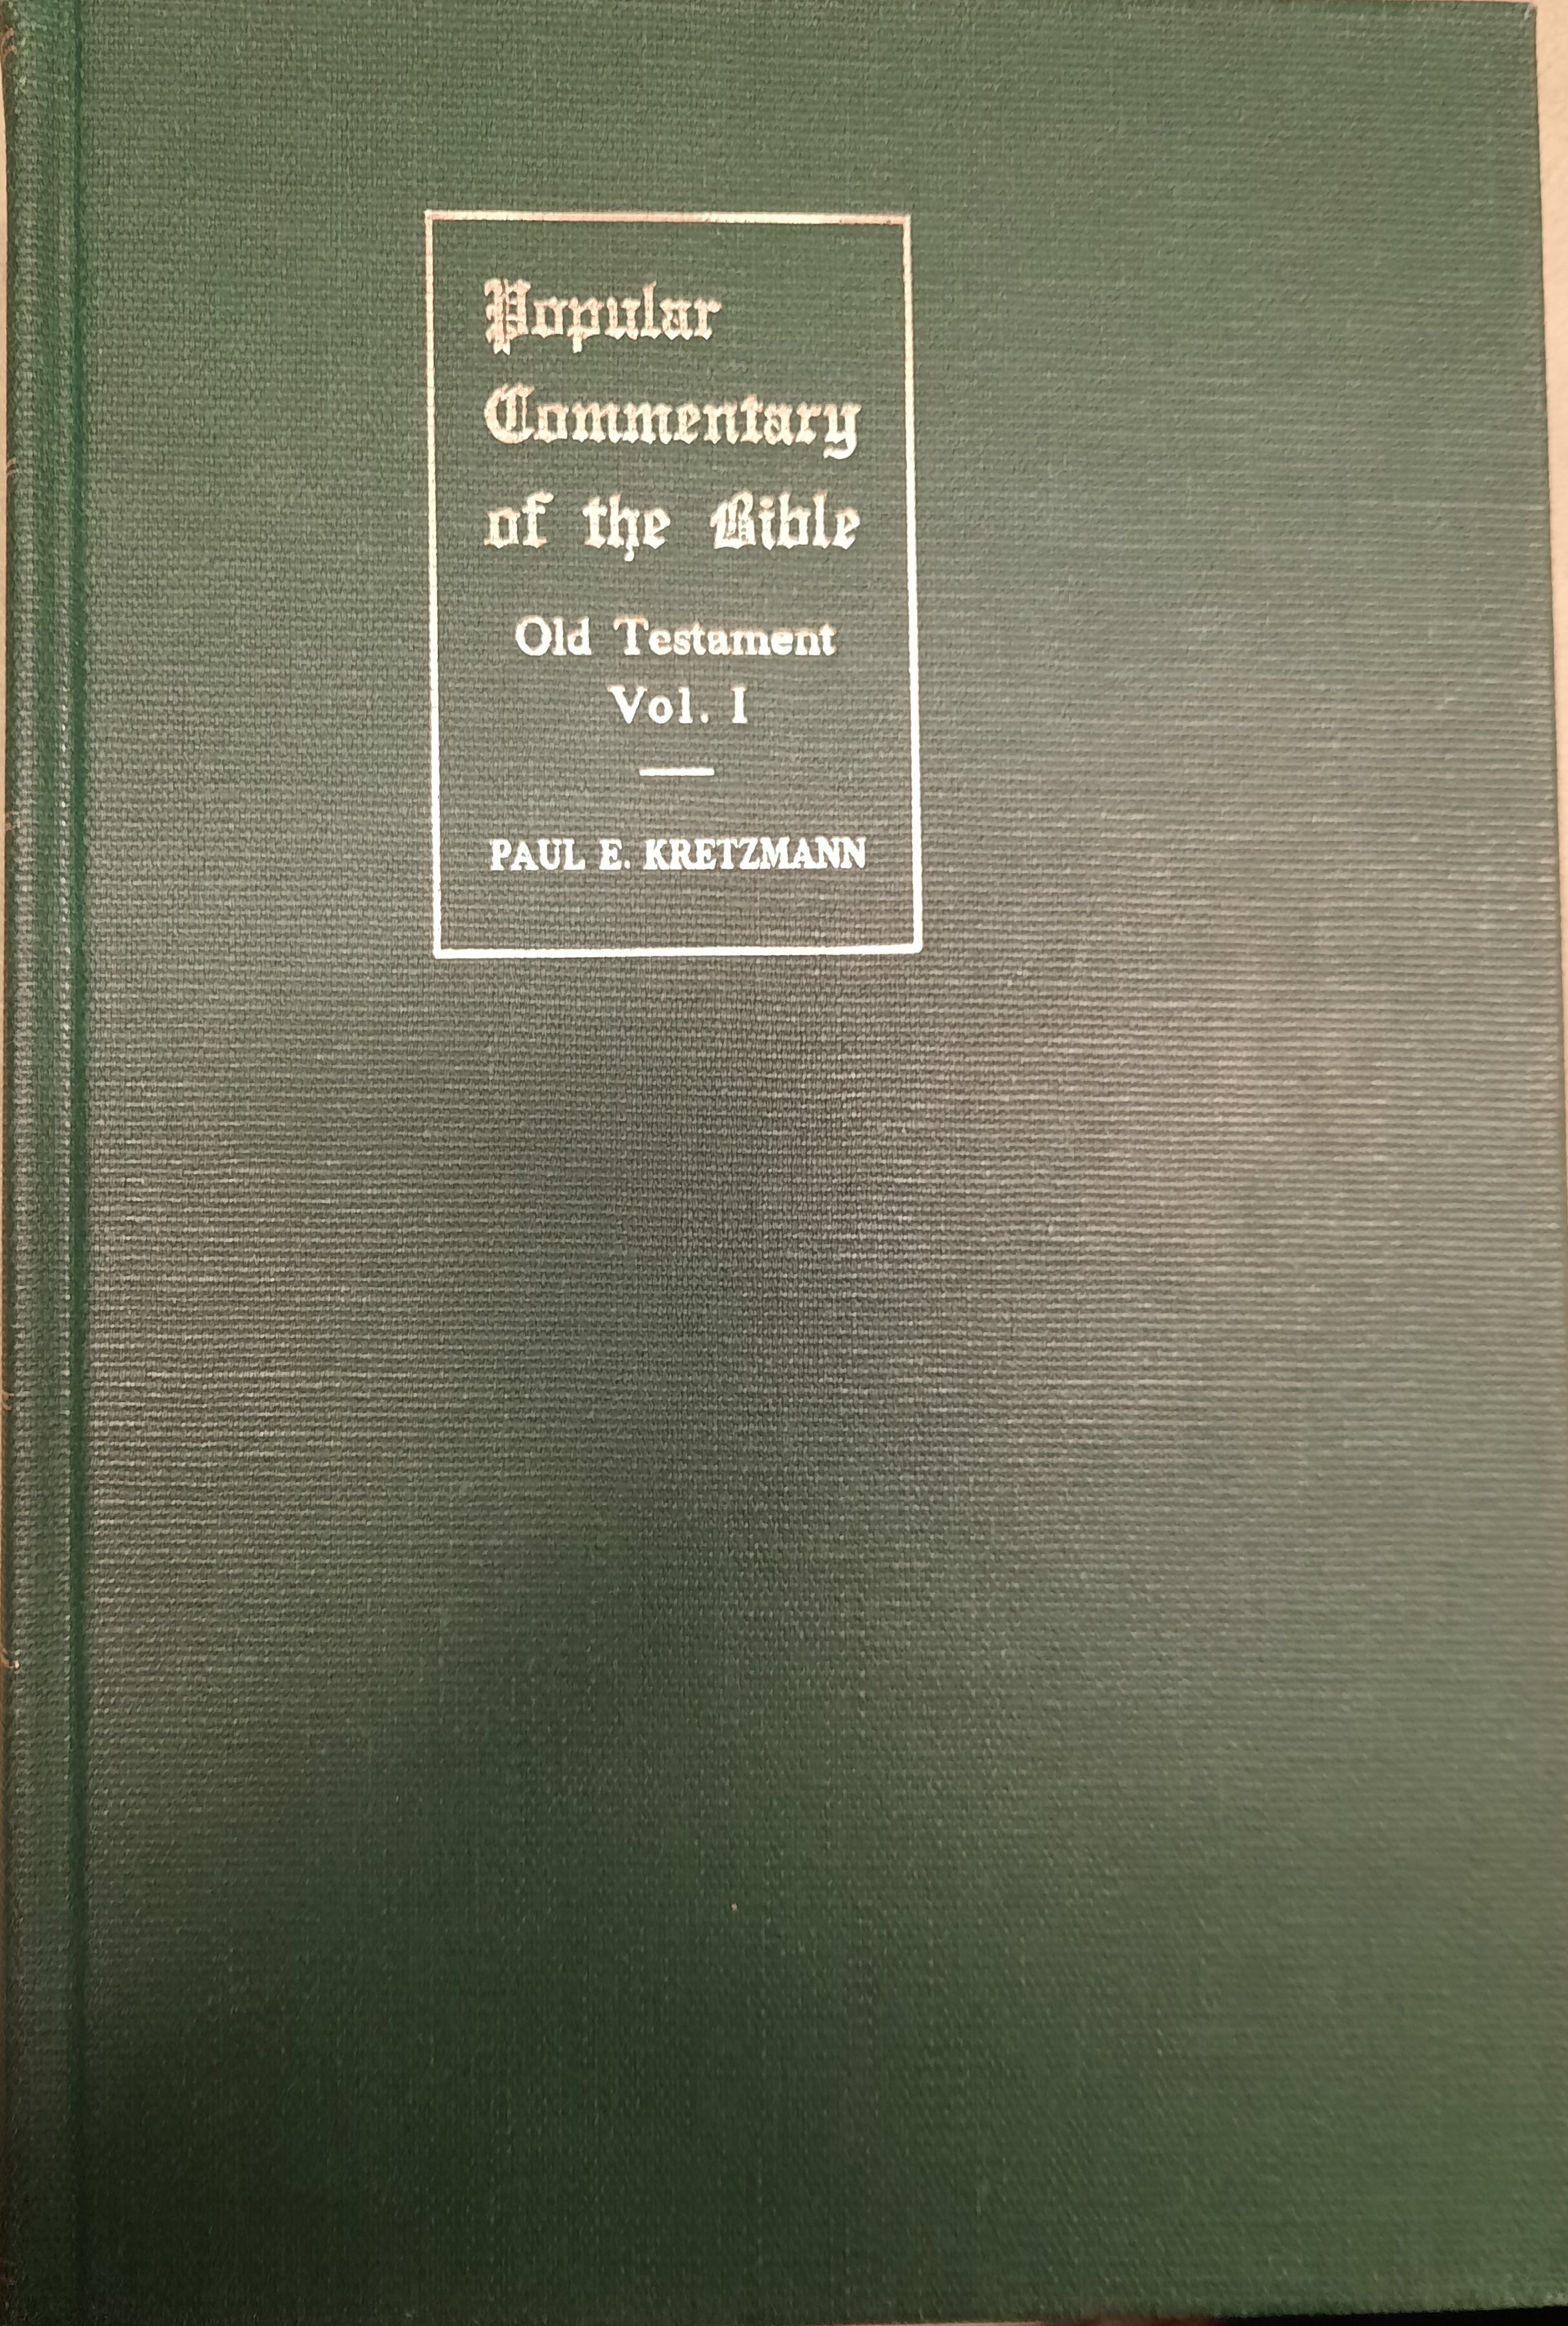 Popular Commentary of the Bible Old Testament Vol I